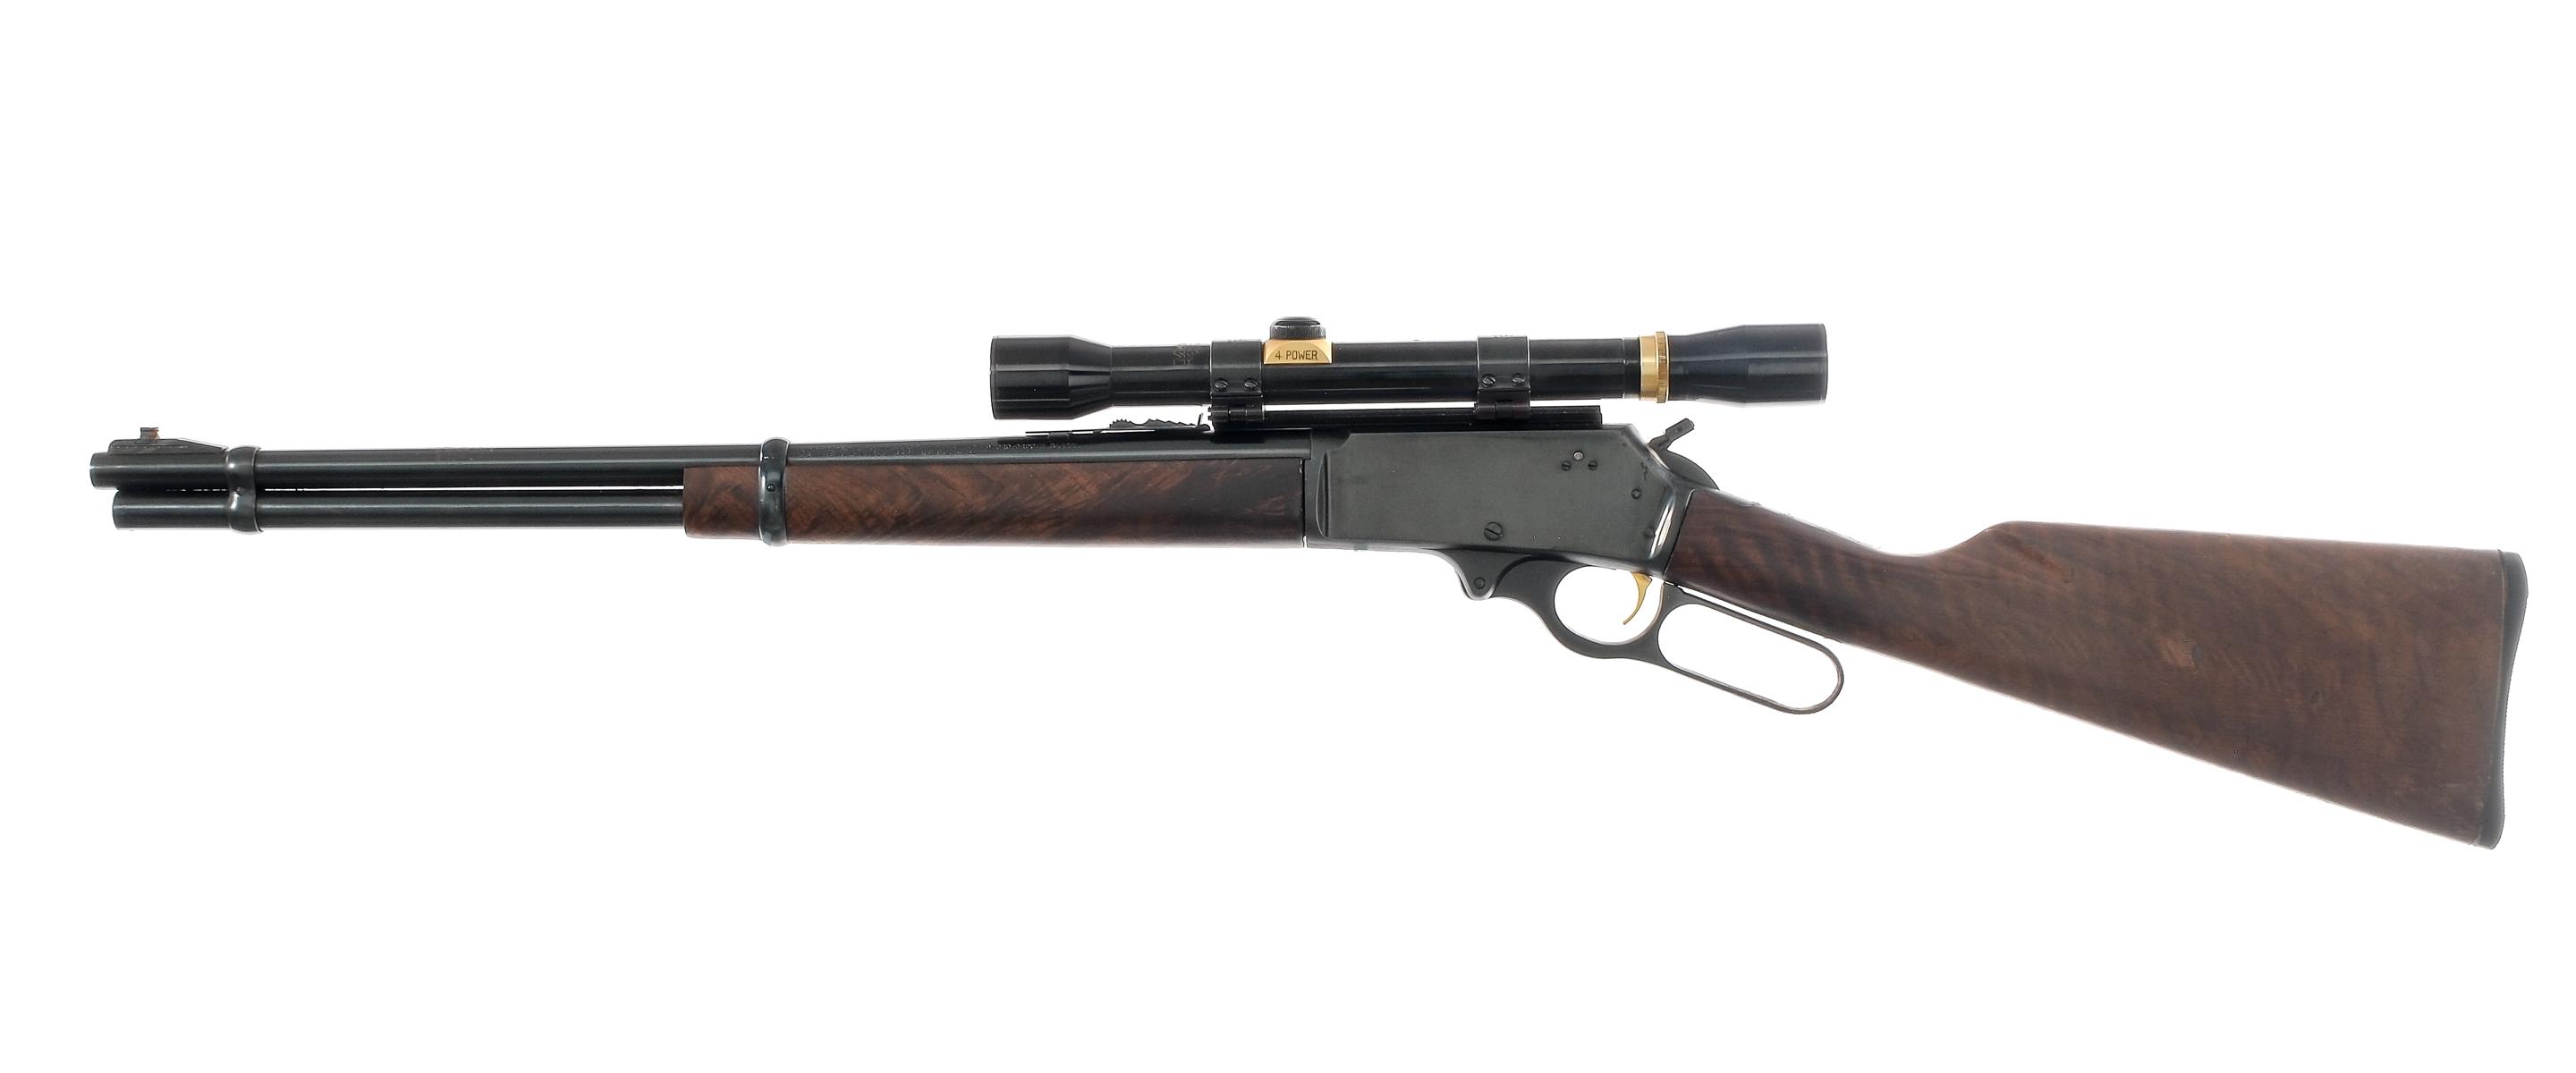 JM Marlin 336 .30-30 Win Lever Action Rifle